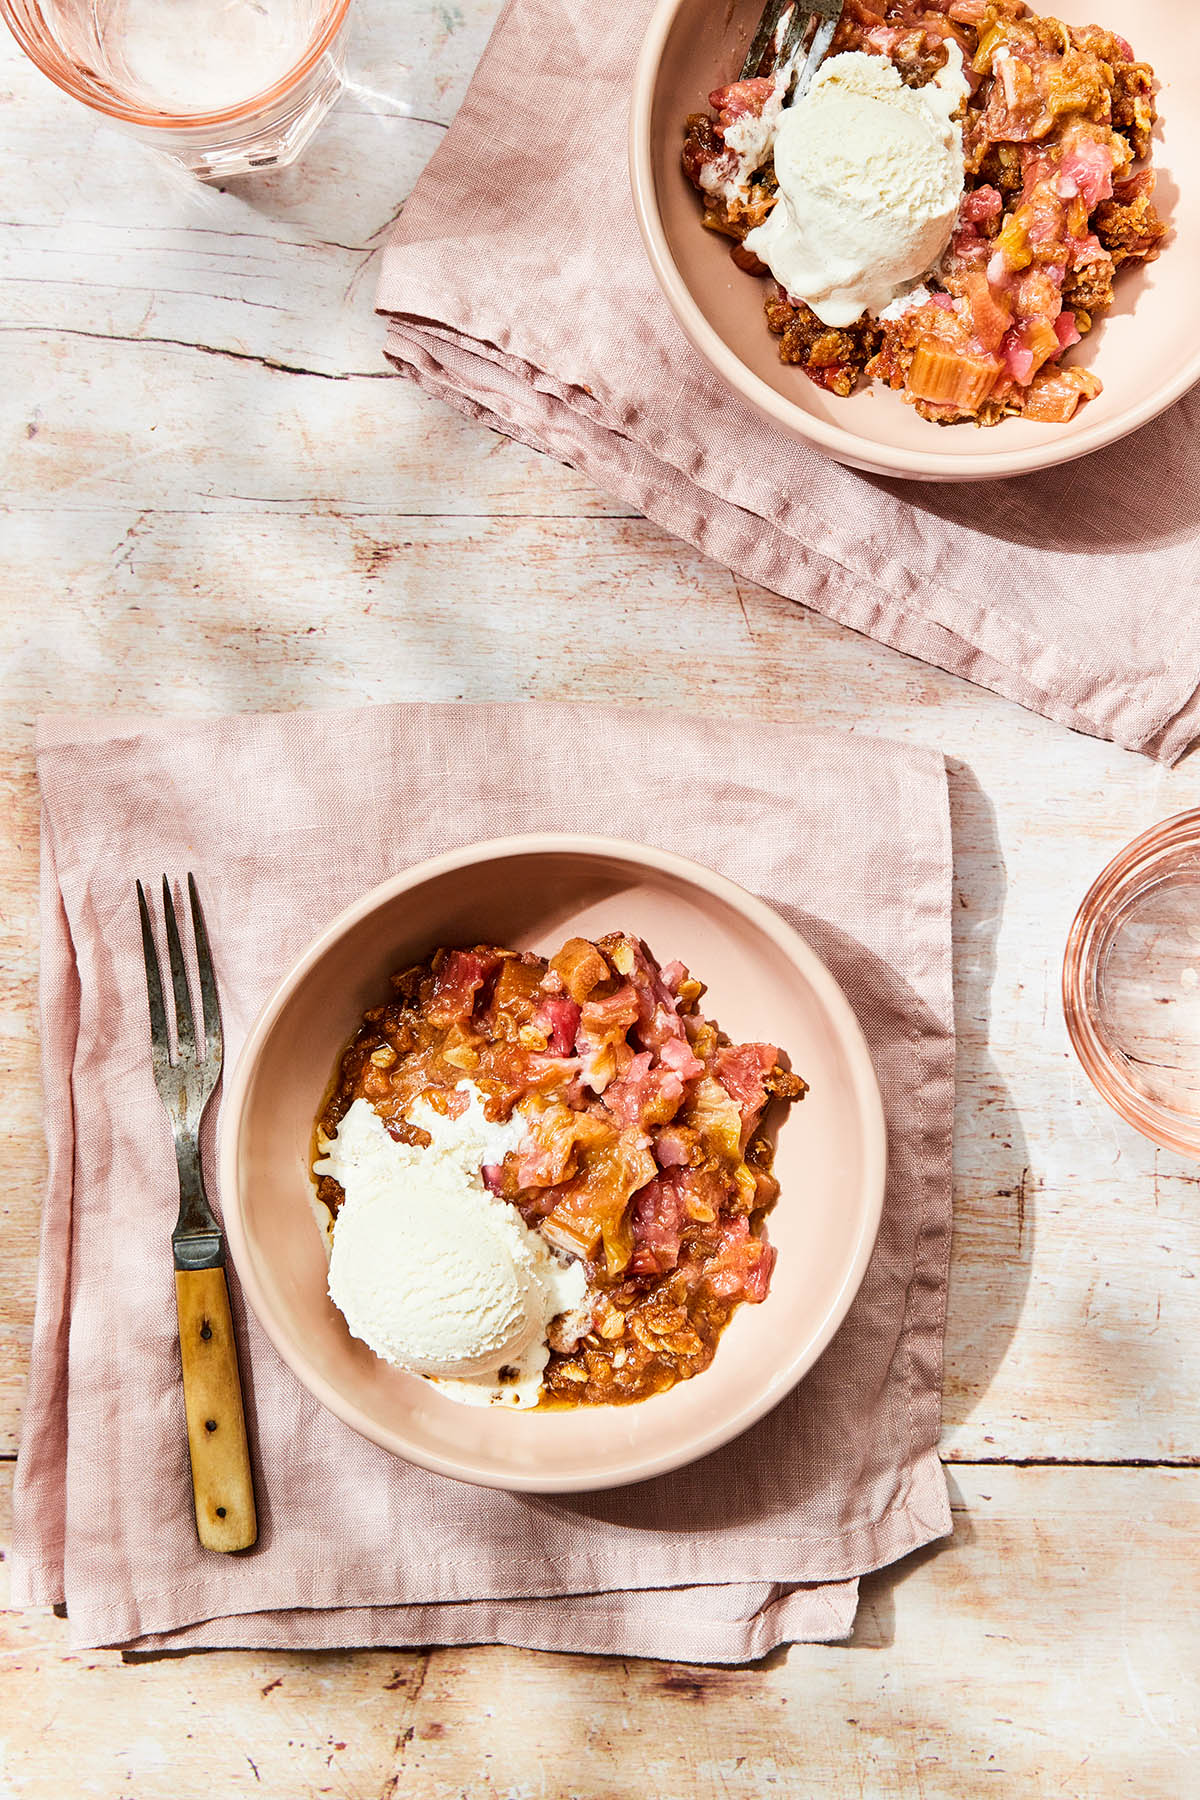 Two bowls of gluten-free rhubarb crisp topped with ice cream on a wood table.